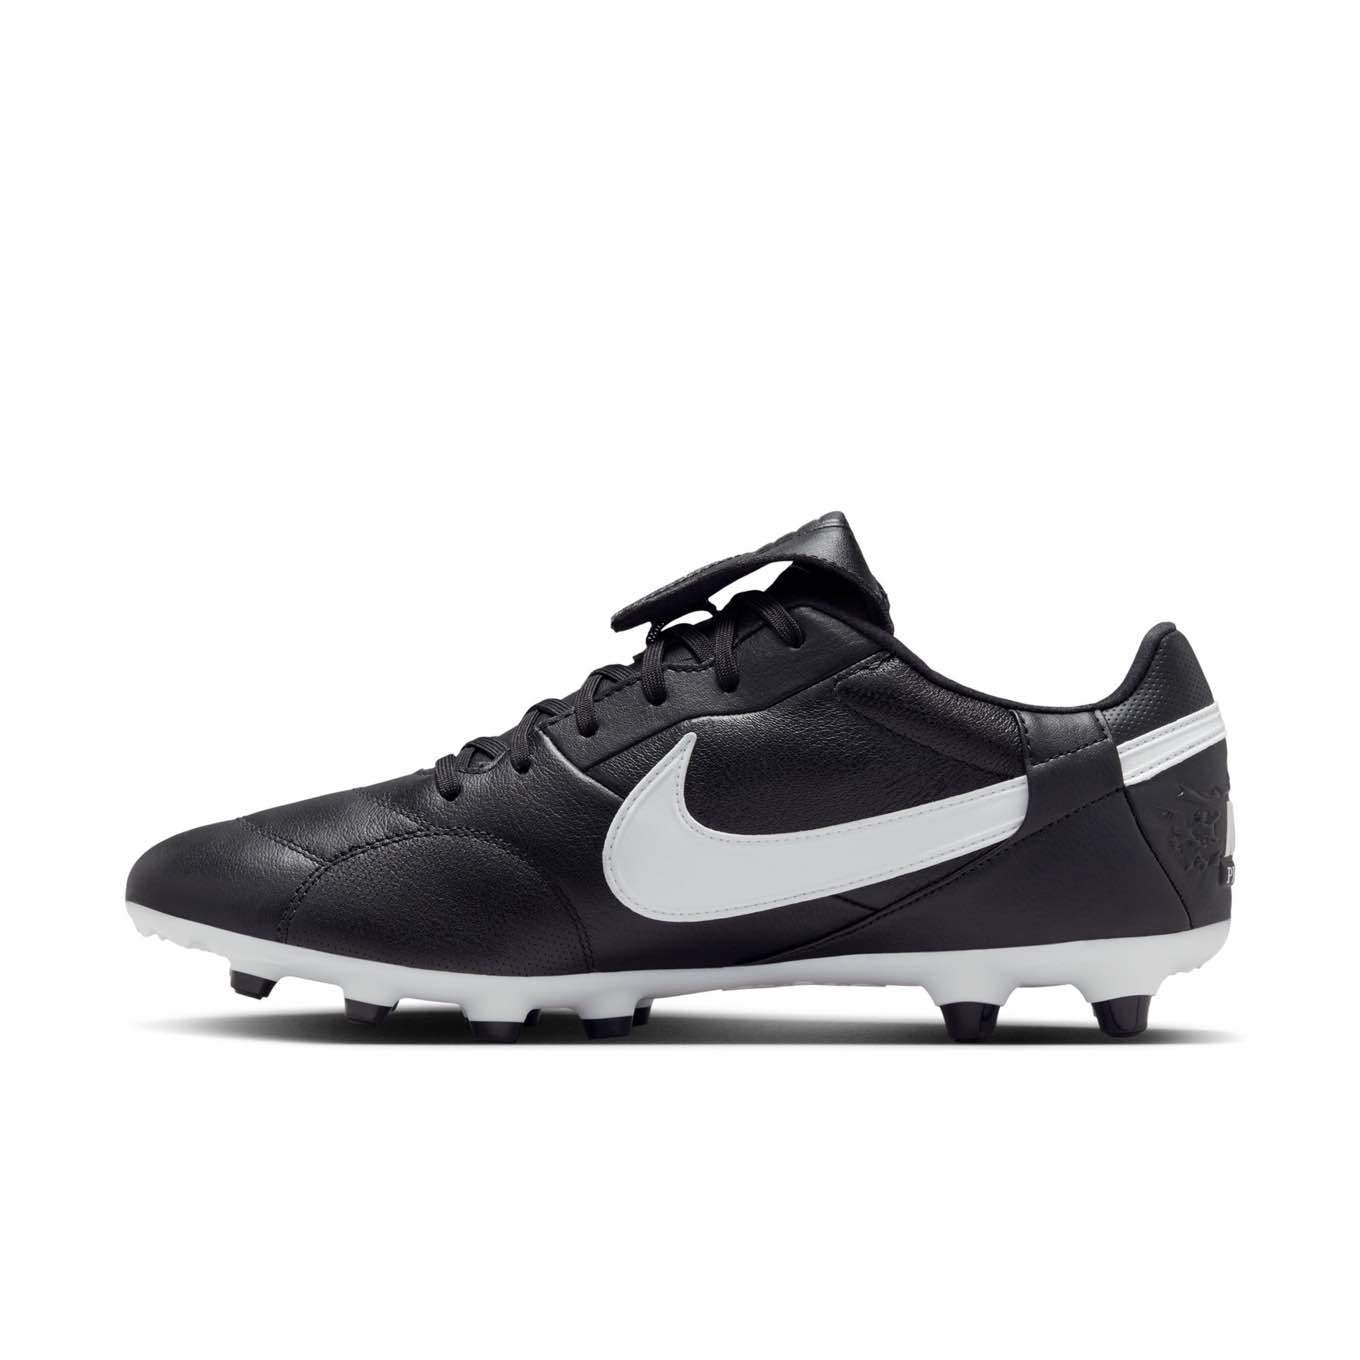 Nike Premier 3 Nike Premier 3 FG Firm-Ground Low-Top Soccer Cleats